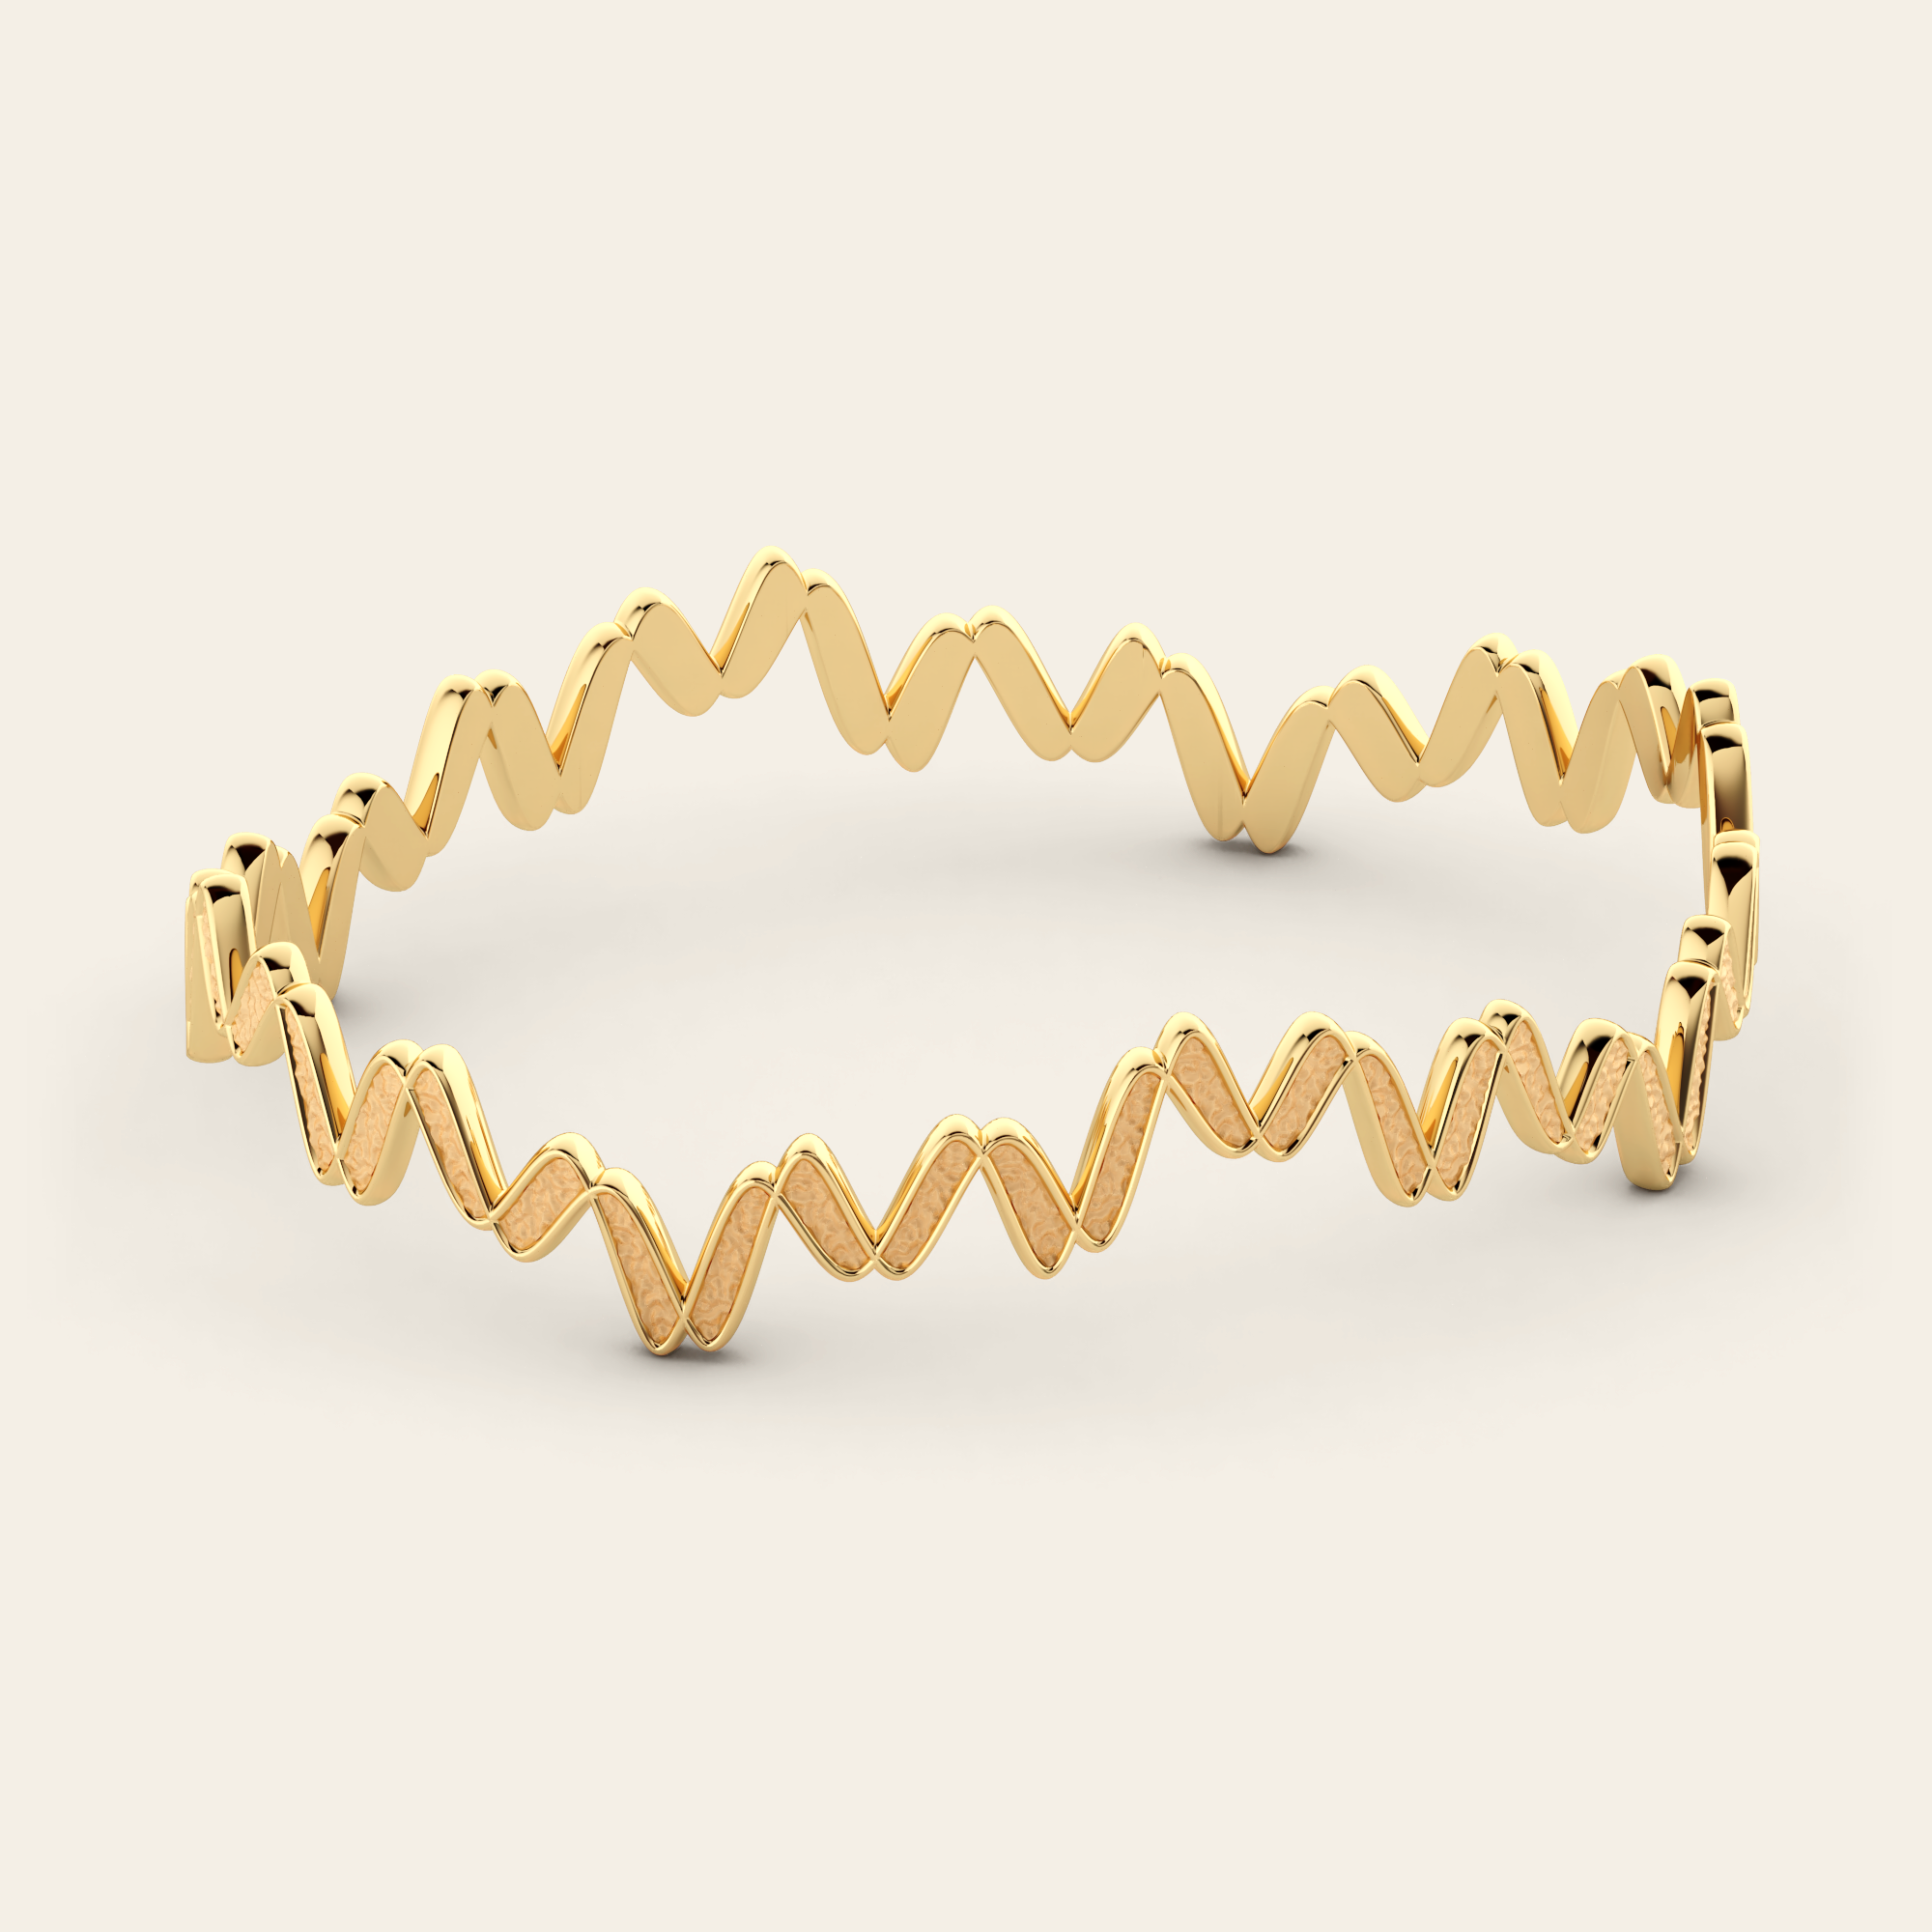 Single Cadence Stacking Bangle in 18k Yellow Gold